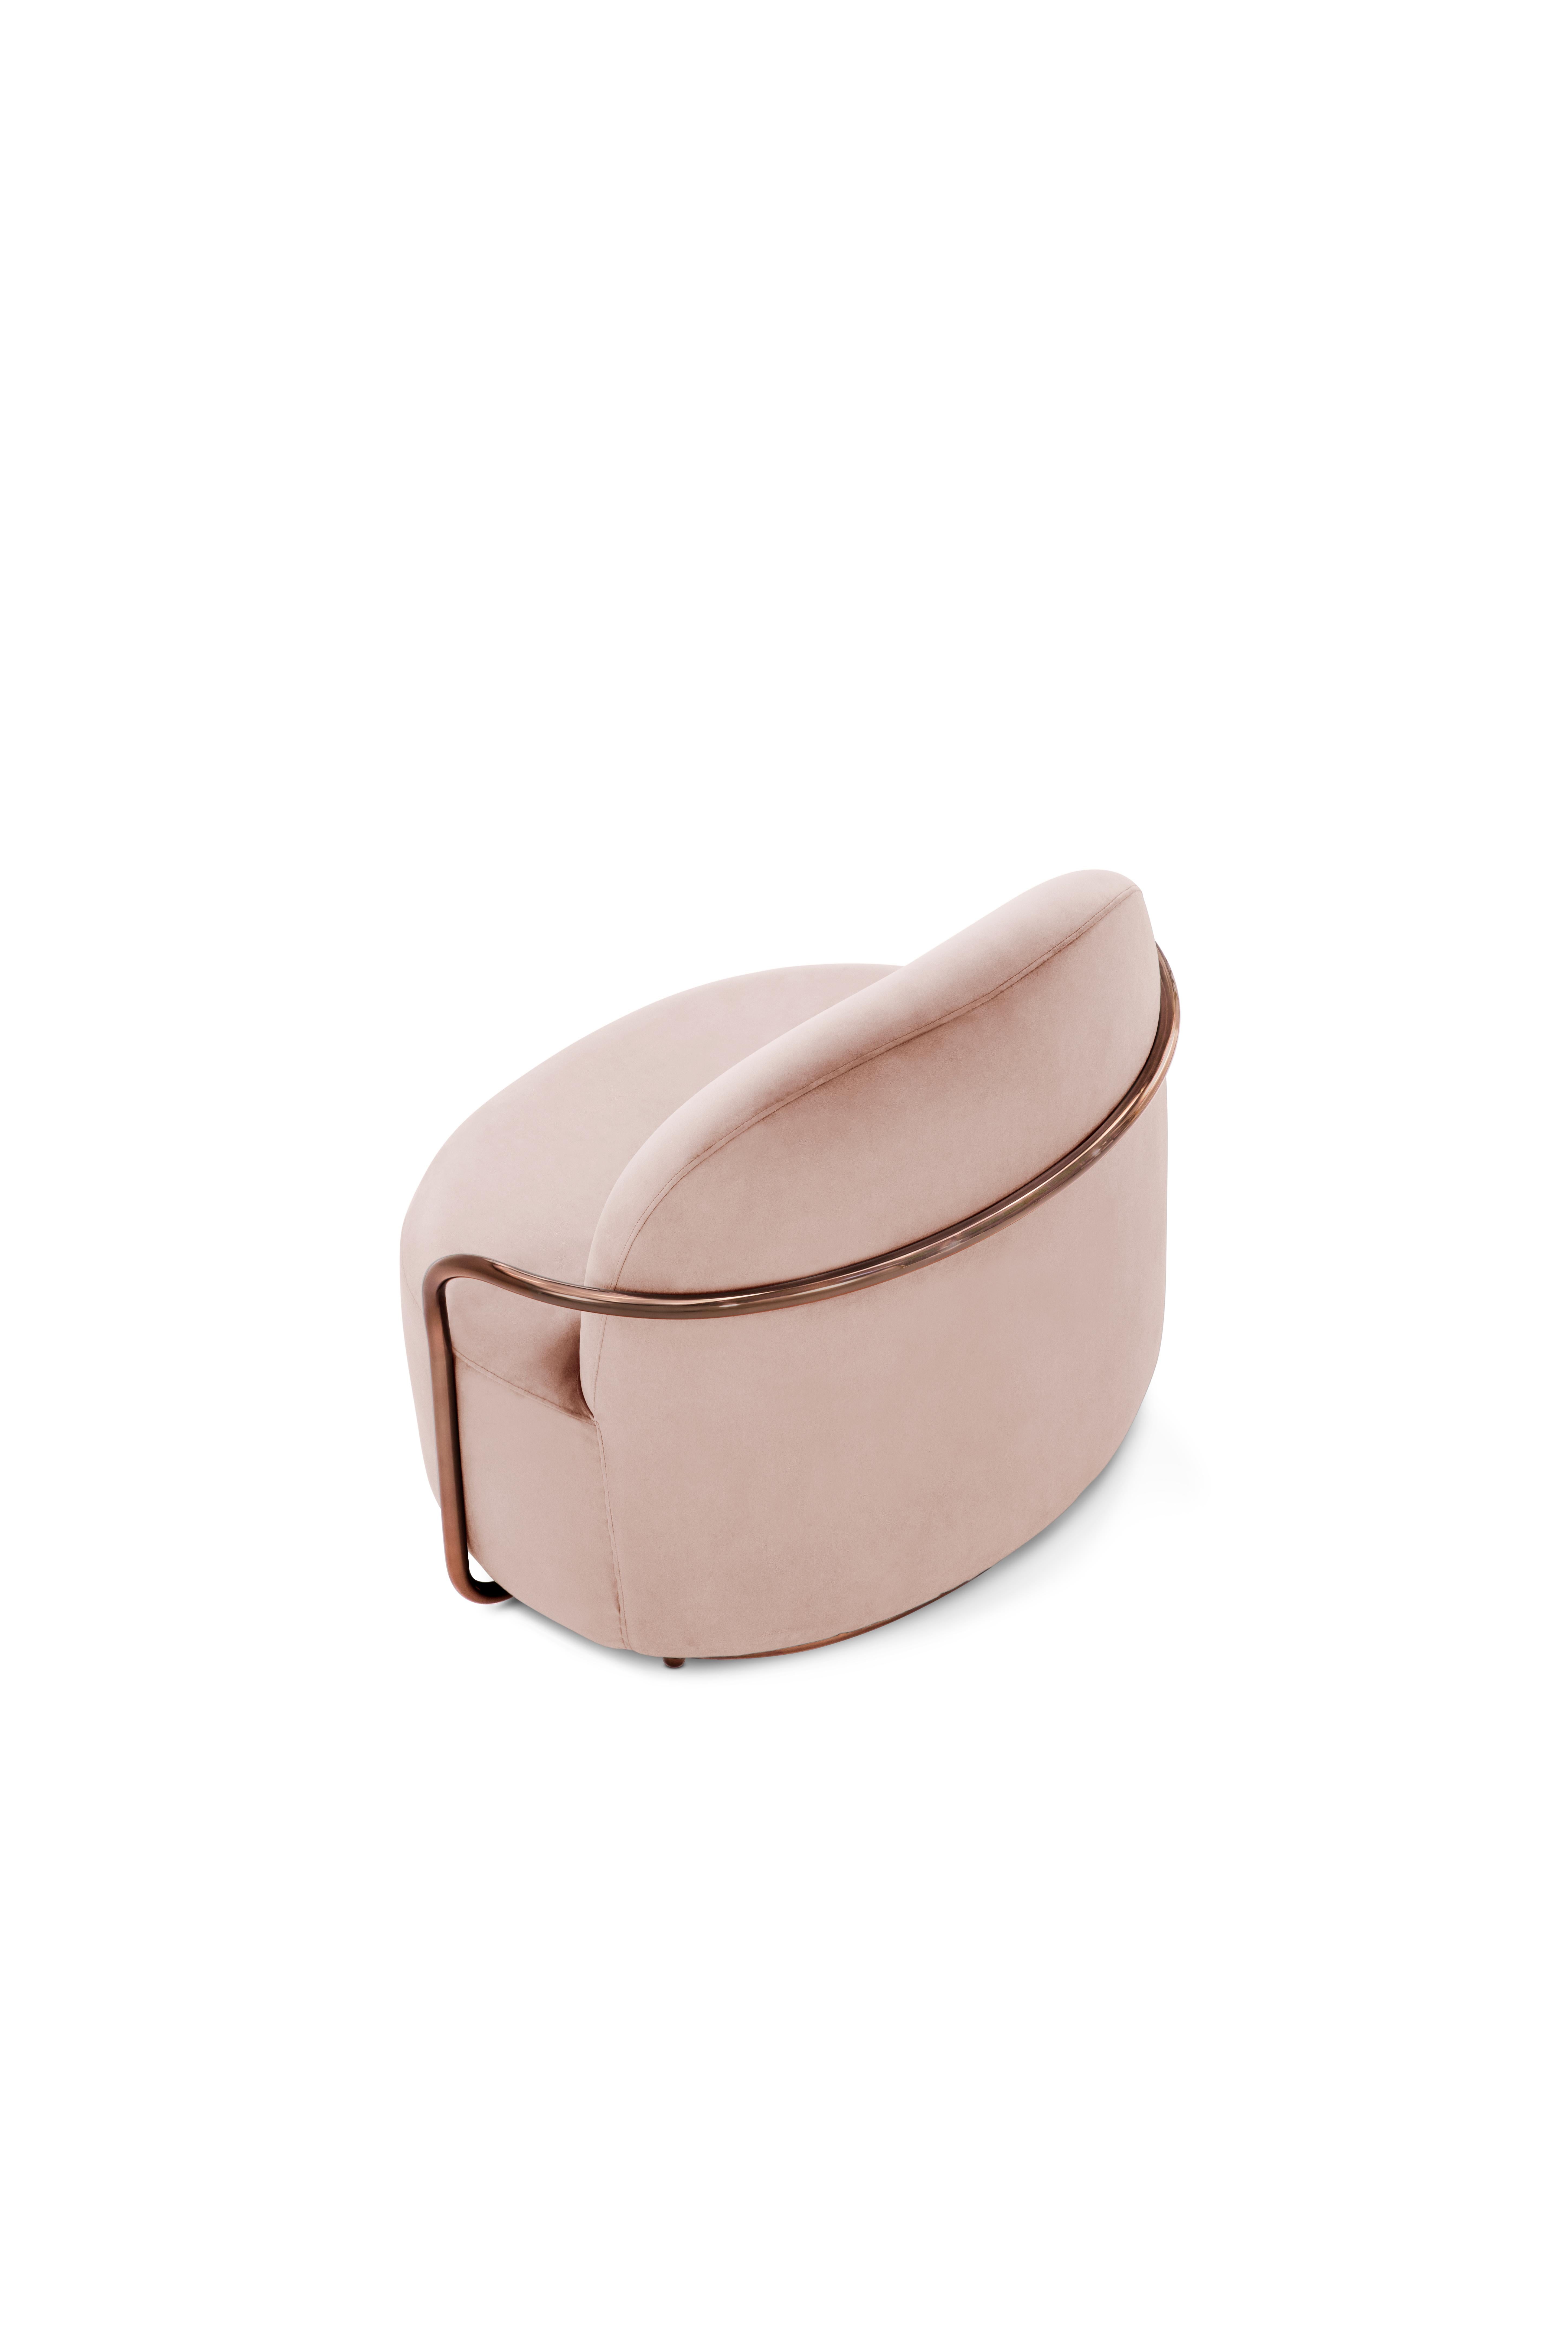 pink chair with arms